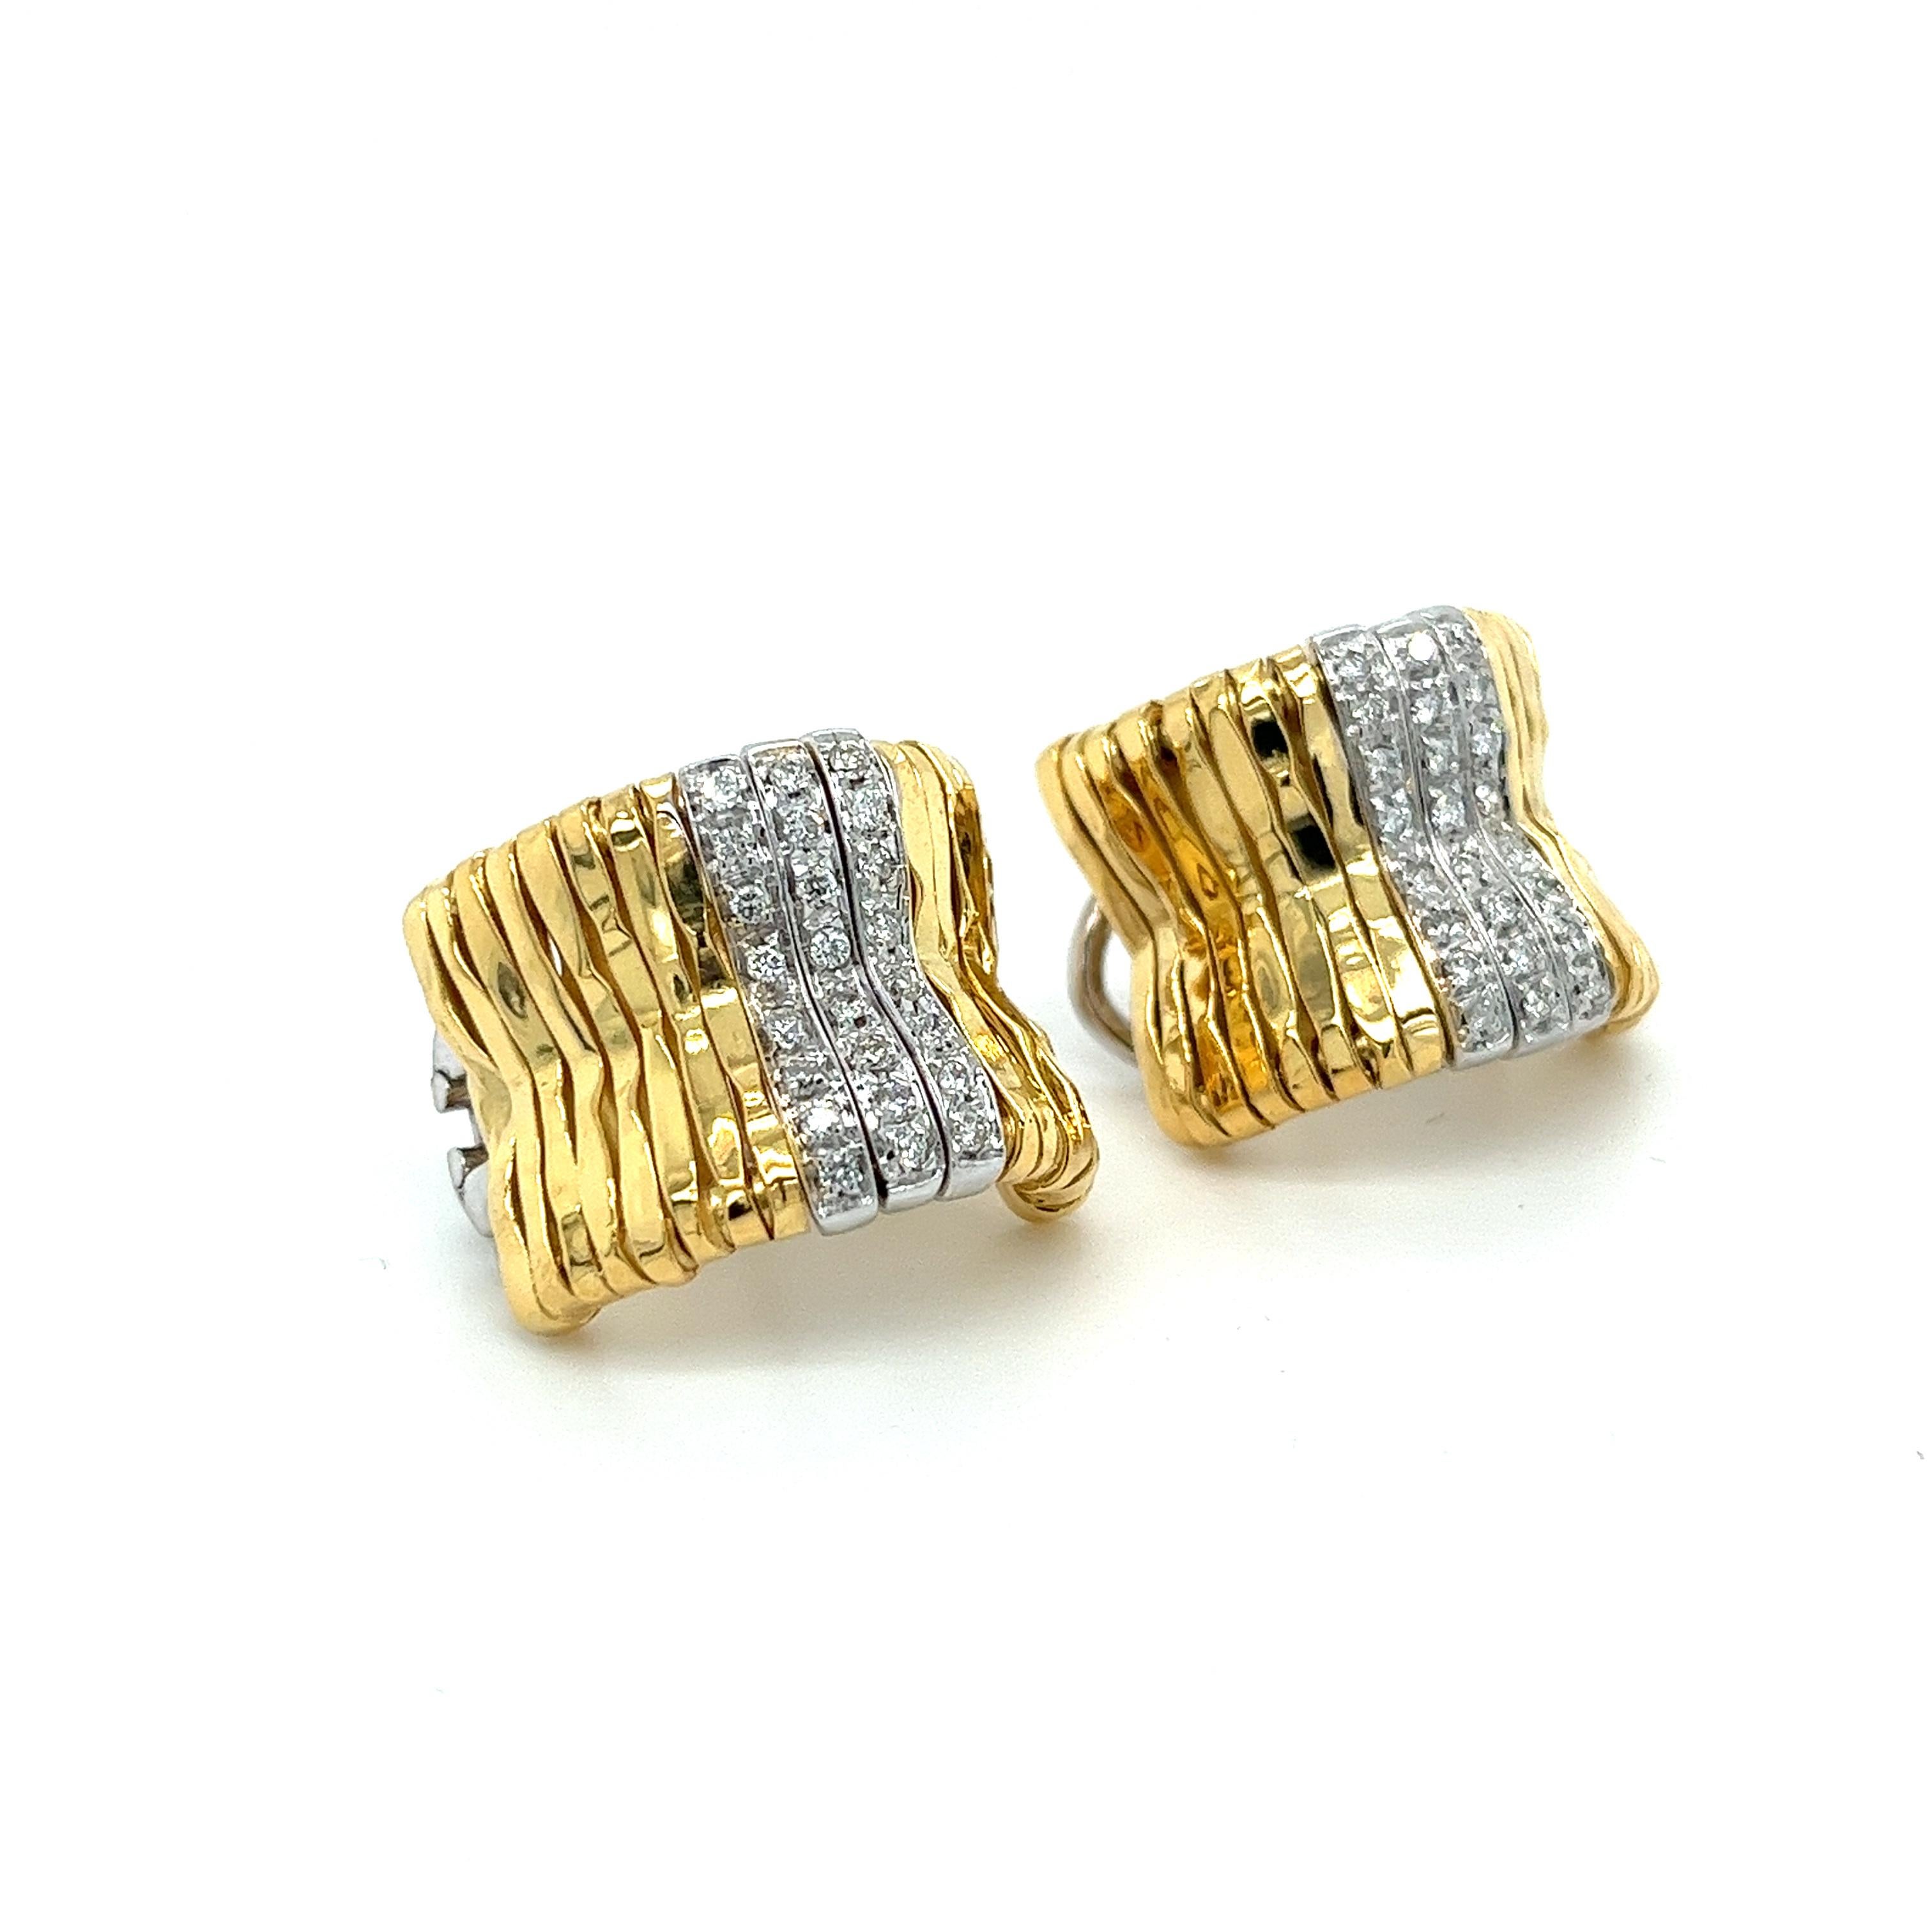 Orlando Orlandini signed handmade 18K yellow gold ribbed bar style hug hoops with 3 rows of white gold pave set round cut diamonds. These vintage earrings feature 48 brilliant cut diamonds approximately of 0.50 carats total. Mountings have